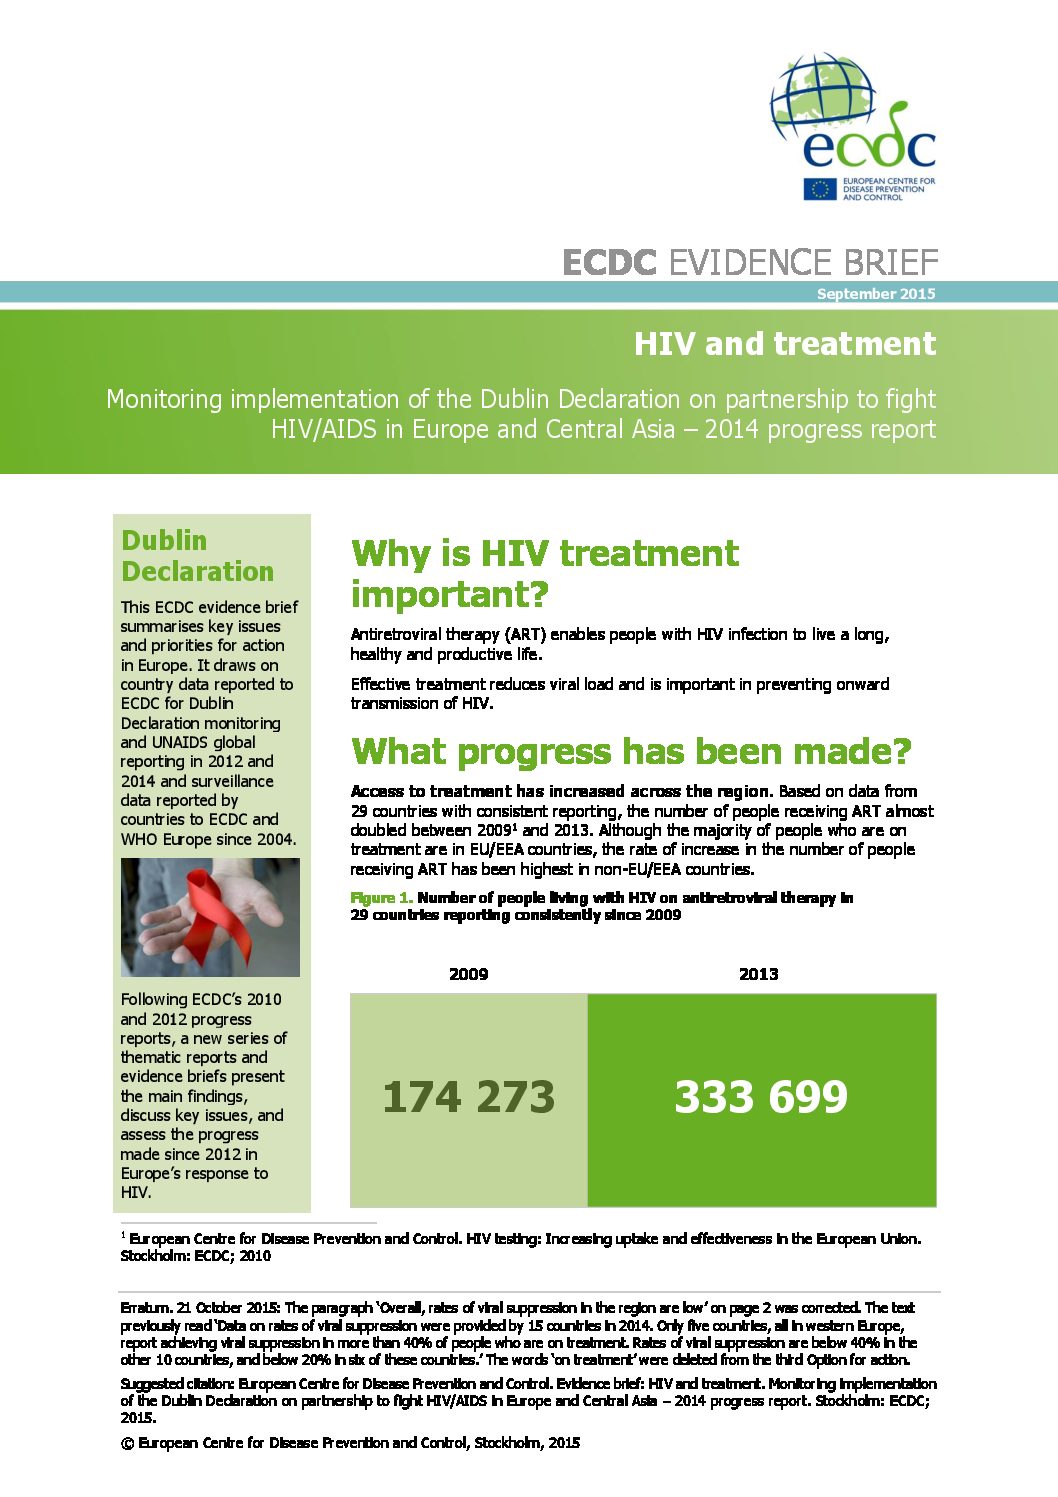 HIV and treatment. Monitoring implementation of the Dublin Declaration on partnership to fight HIV/AIDS in Europe and Central Asia – 2014 progress report